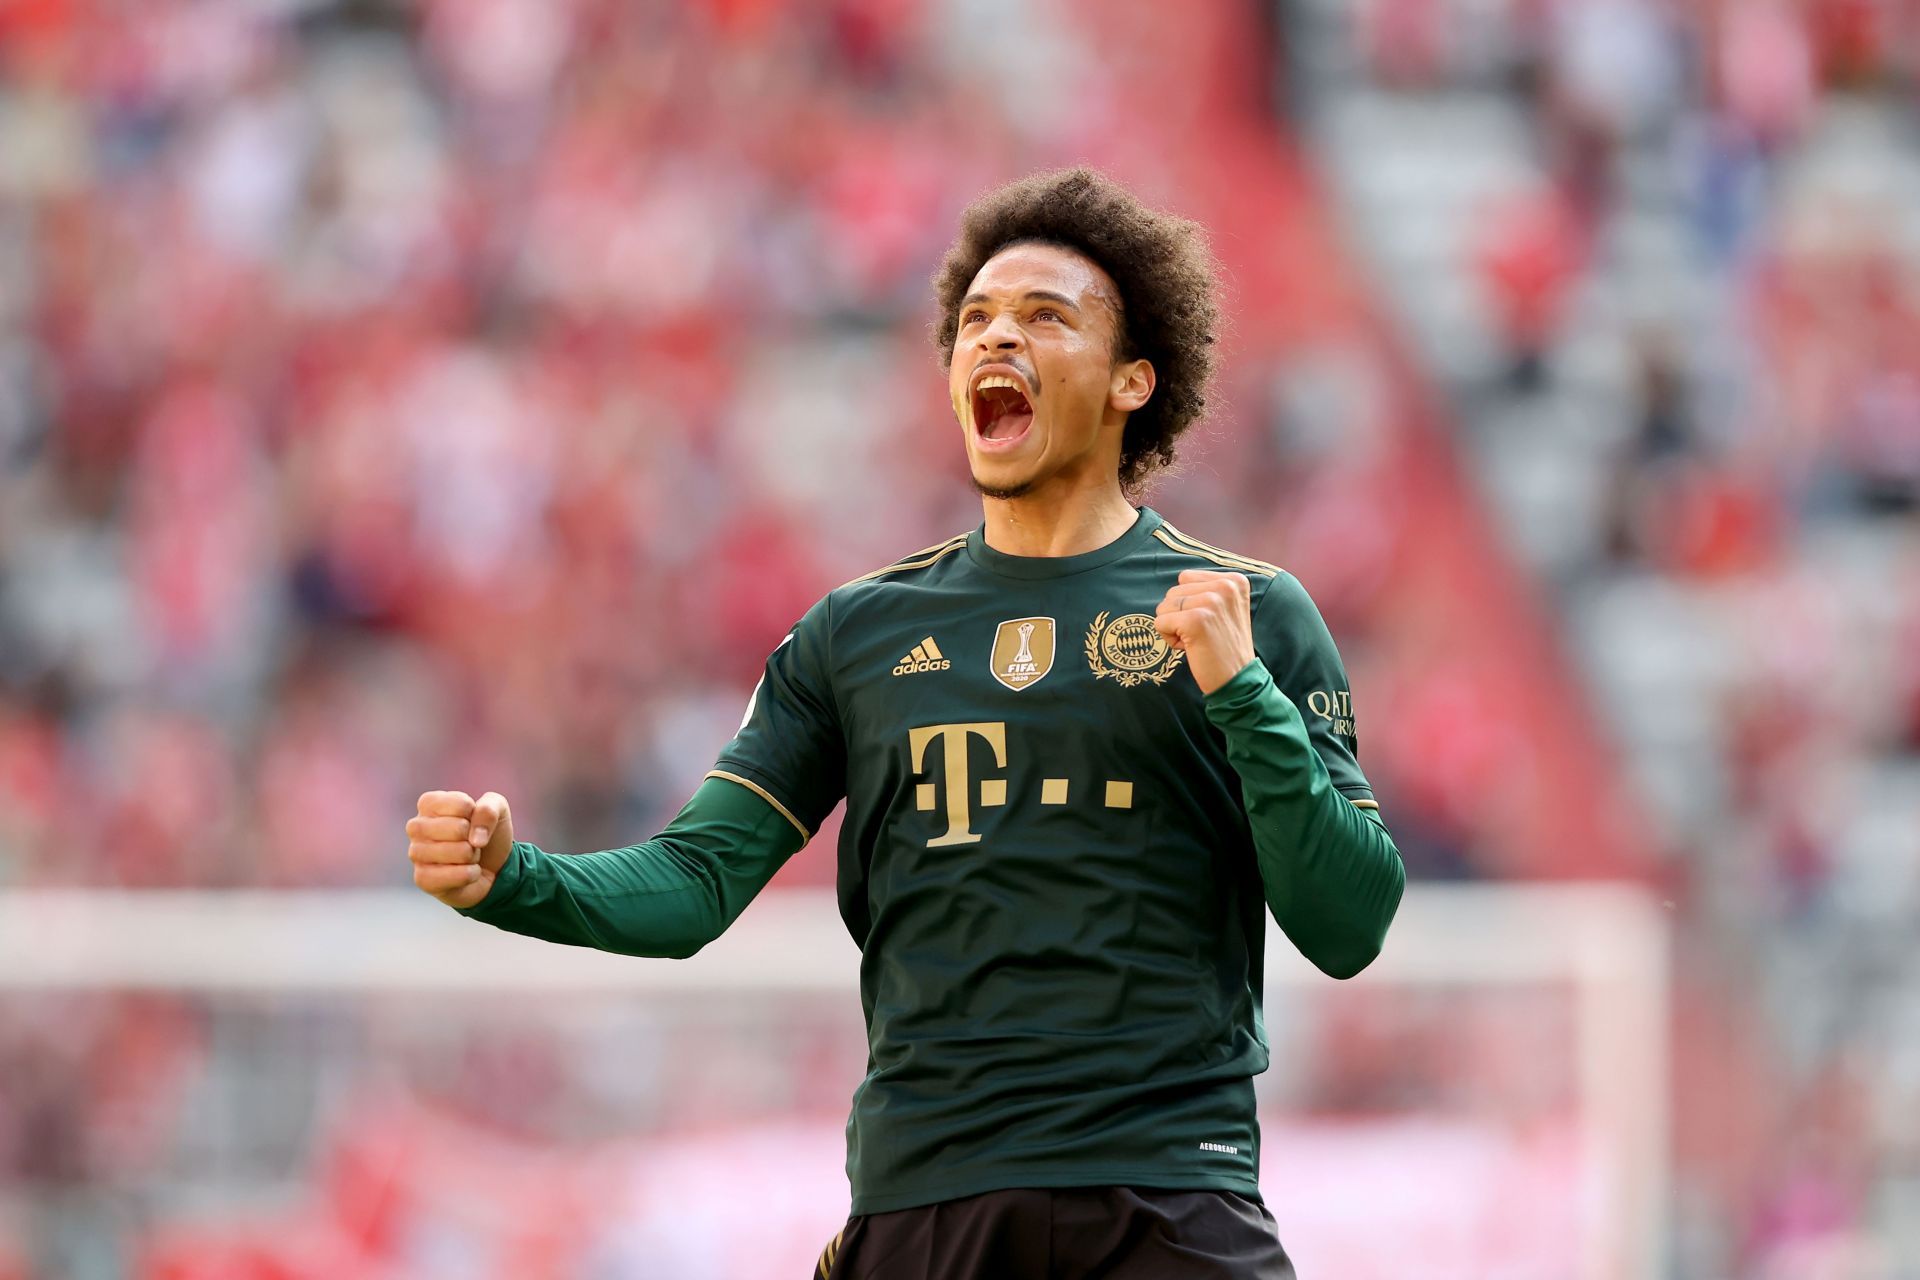 Arsenal are interested in signing Leroy Sane